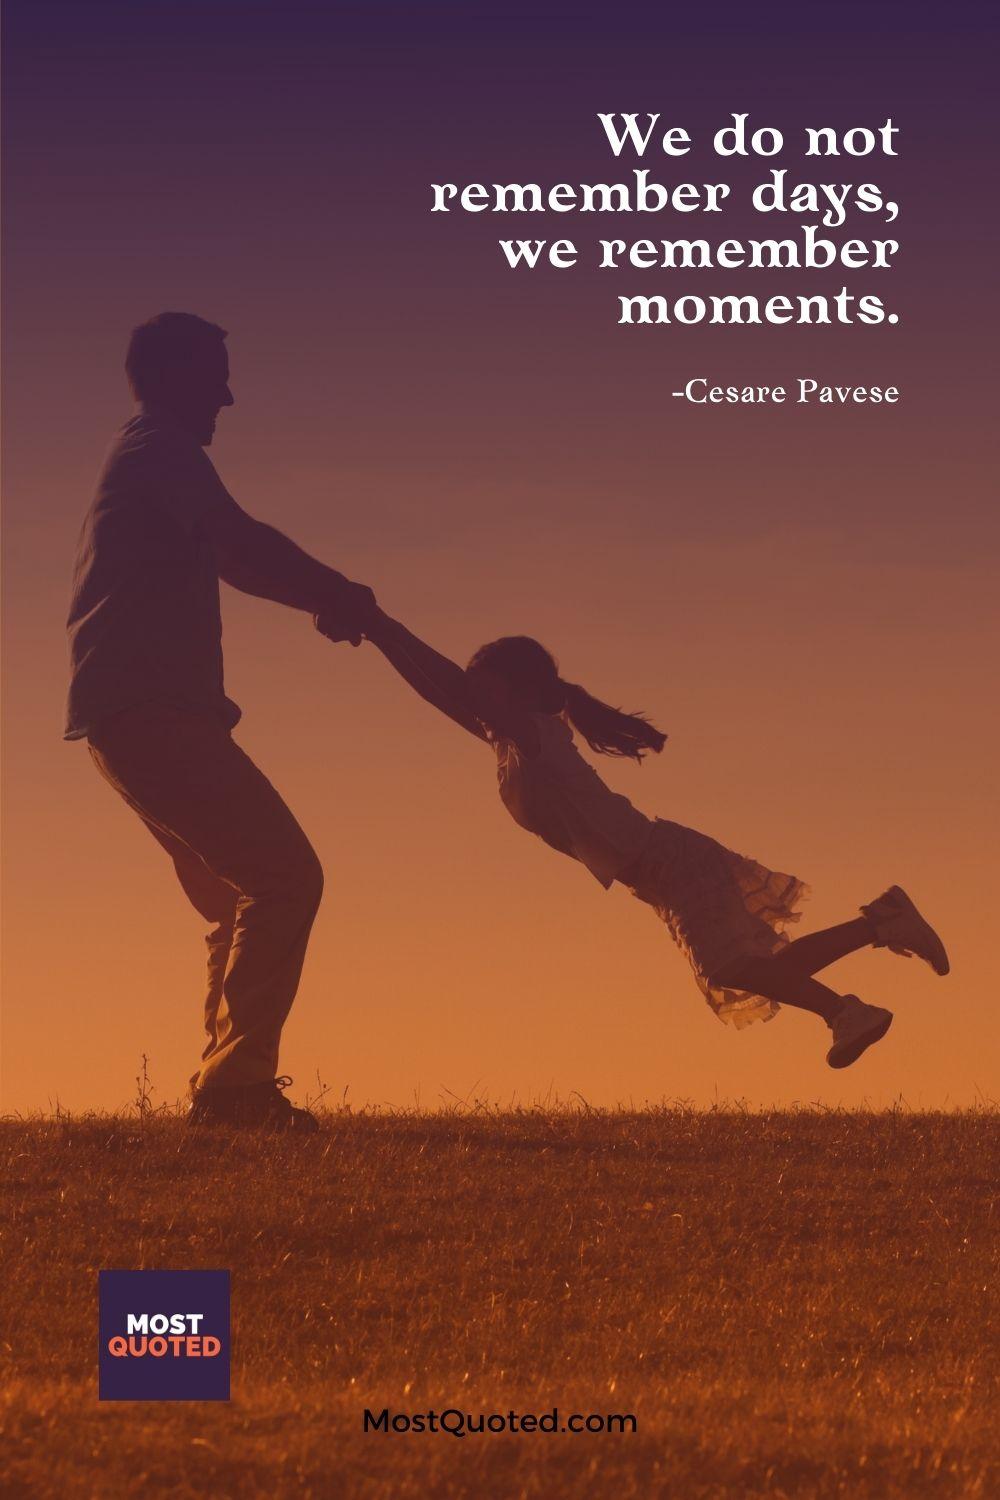 We do not remember days, we remember moments. - Cesare Pavese